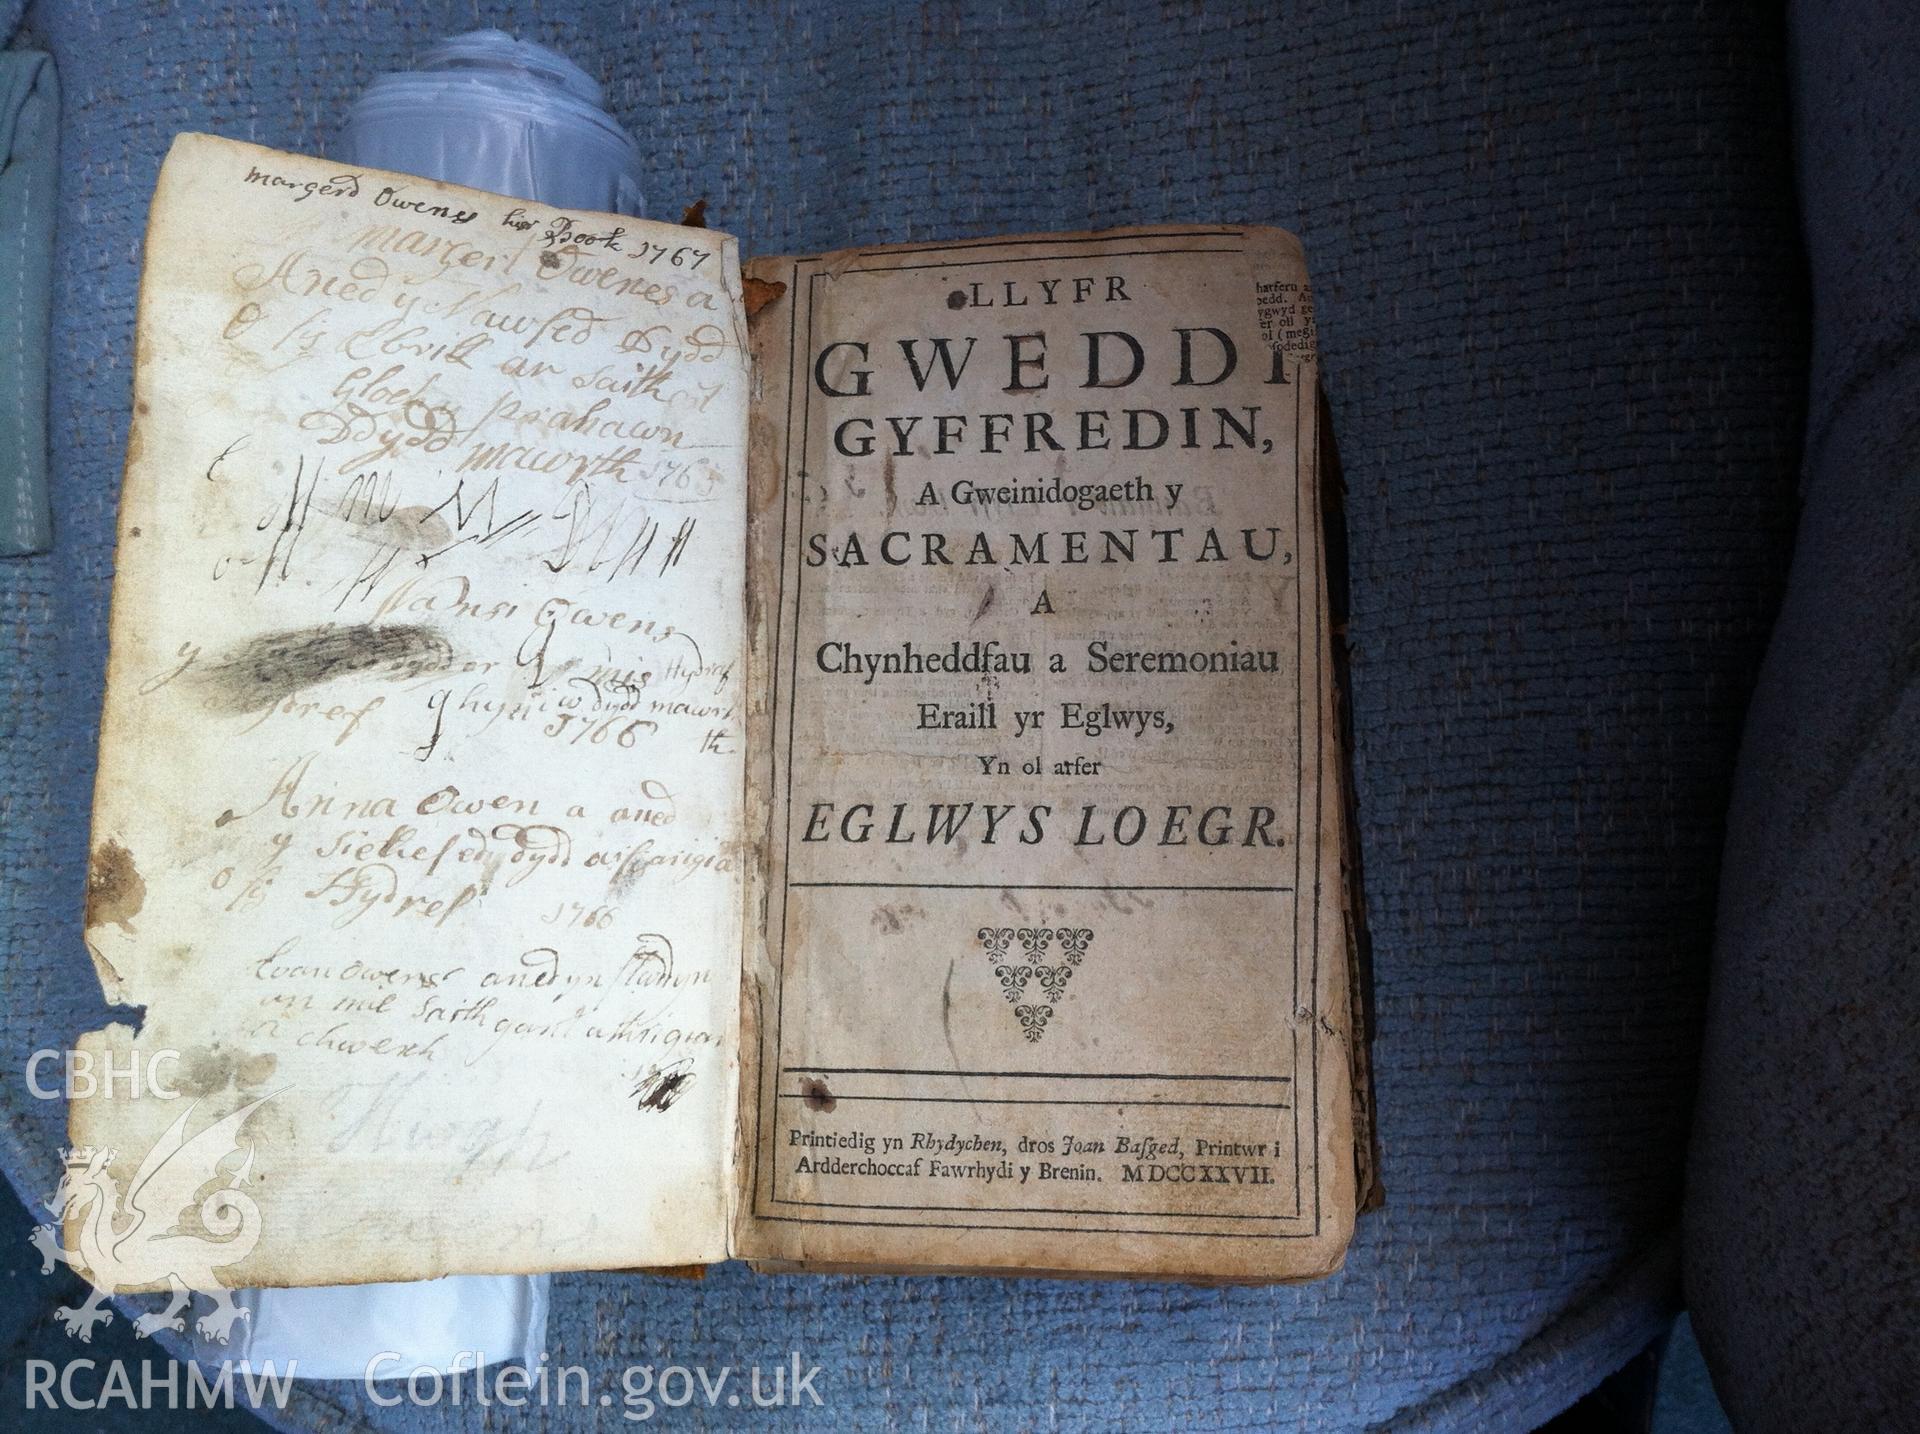 Digital photograph showing inscriptions on the end paper and the cover page of a family bible printed in 1727 and associated with Bryngwenallt Hall, Abergele. Photographed by Gillian Swan in 2017.